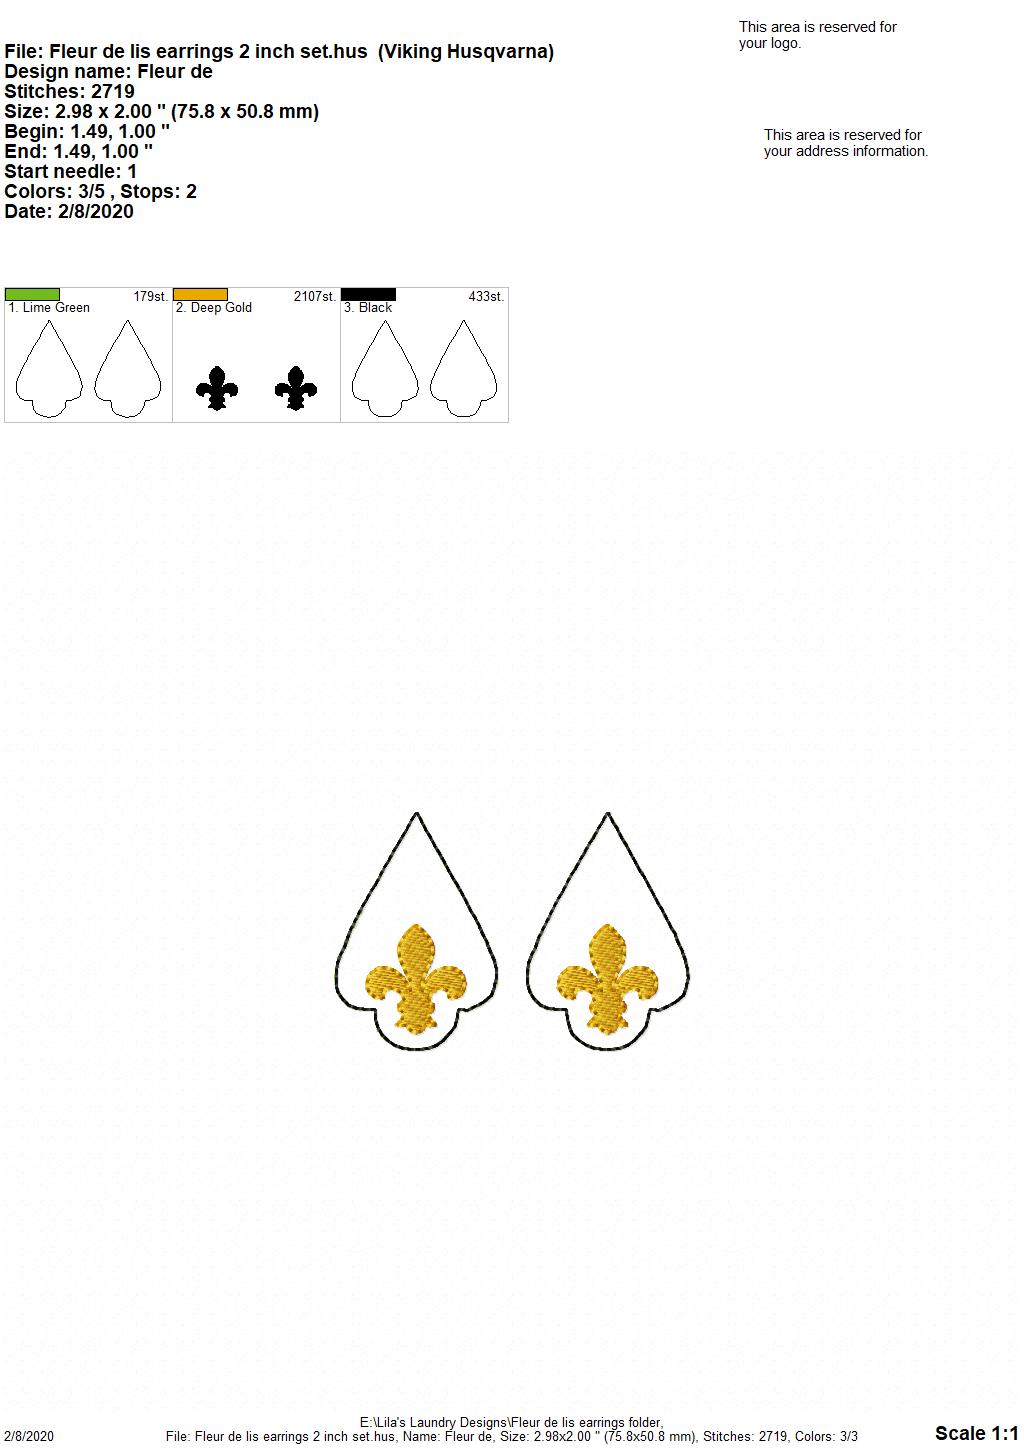 Fleur De Lis Earrings - 3 sizes - 4x4 and 5x7 Grouped- Digital Embroidery Design